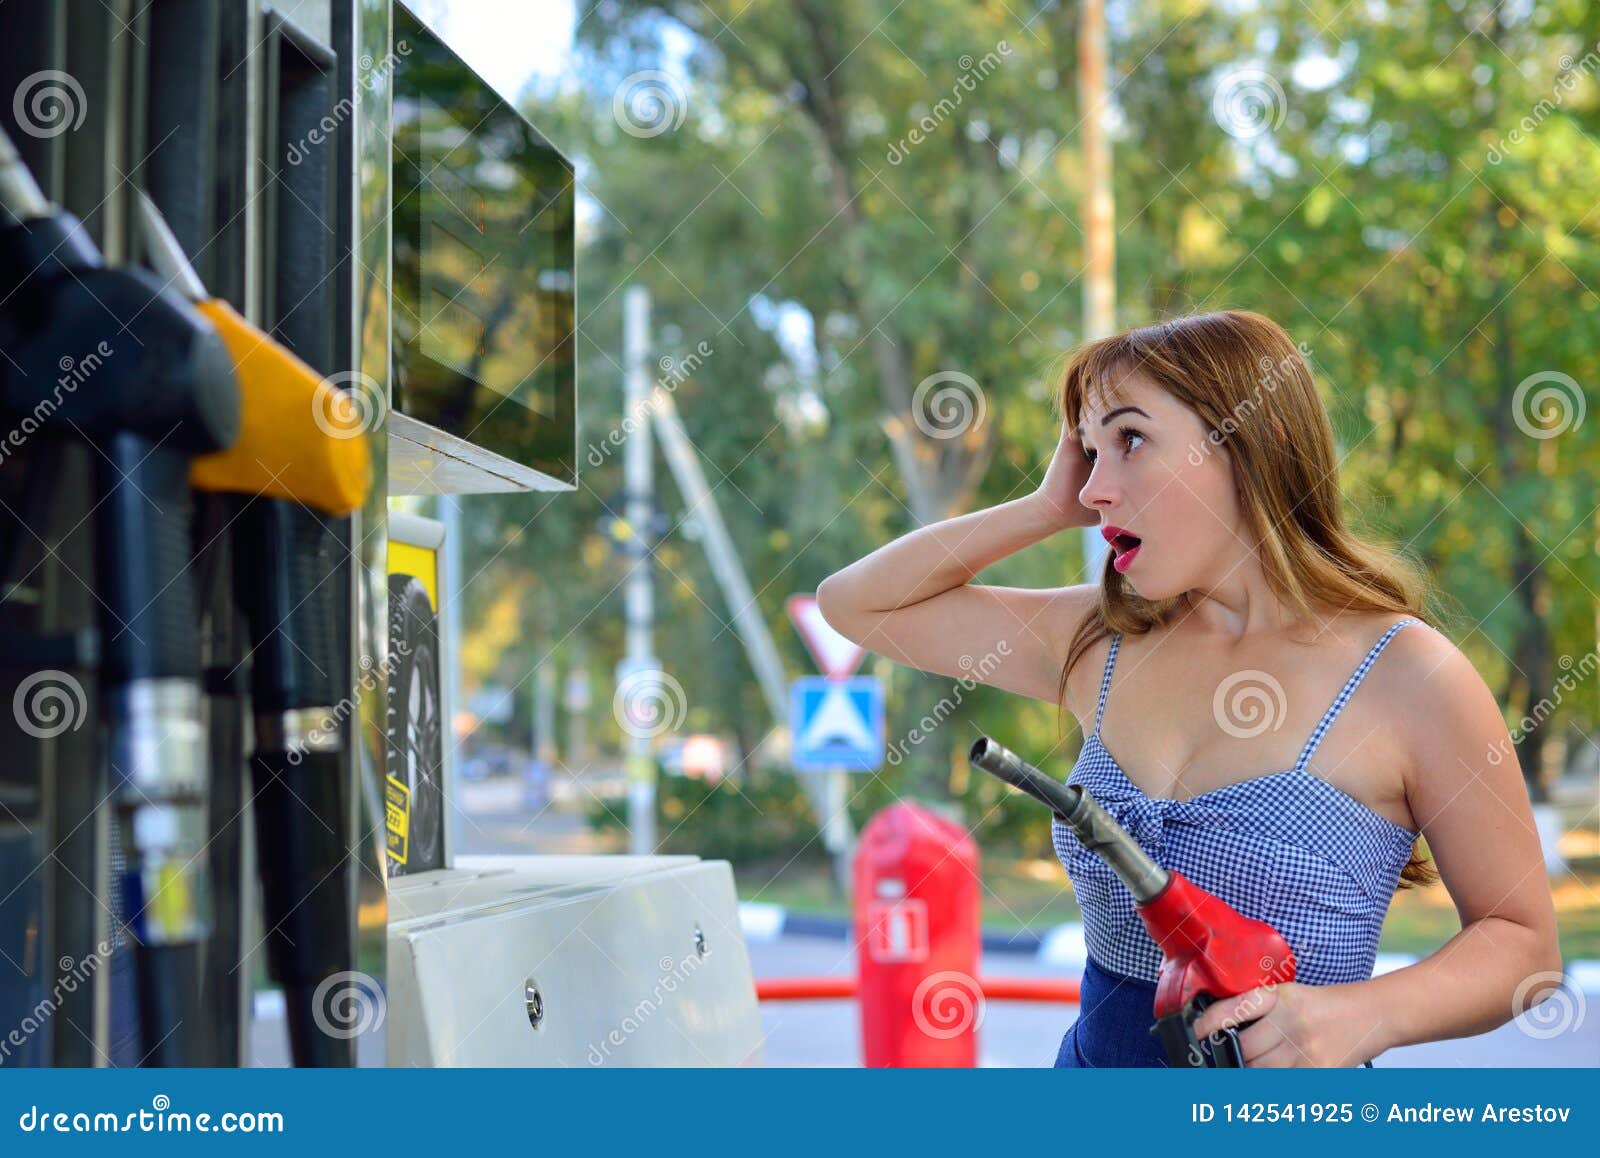 The Girl Refills The Car At The Gas Station And Is Surprised Stock